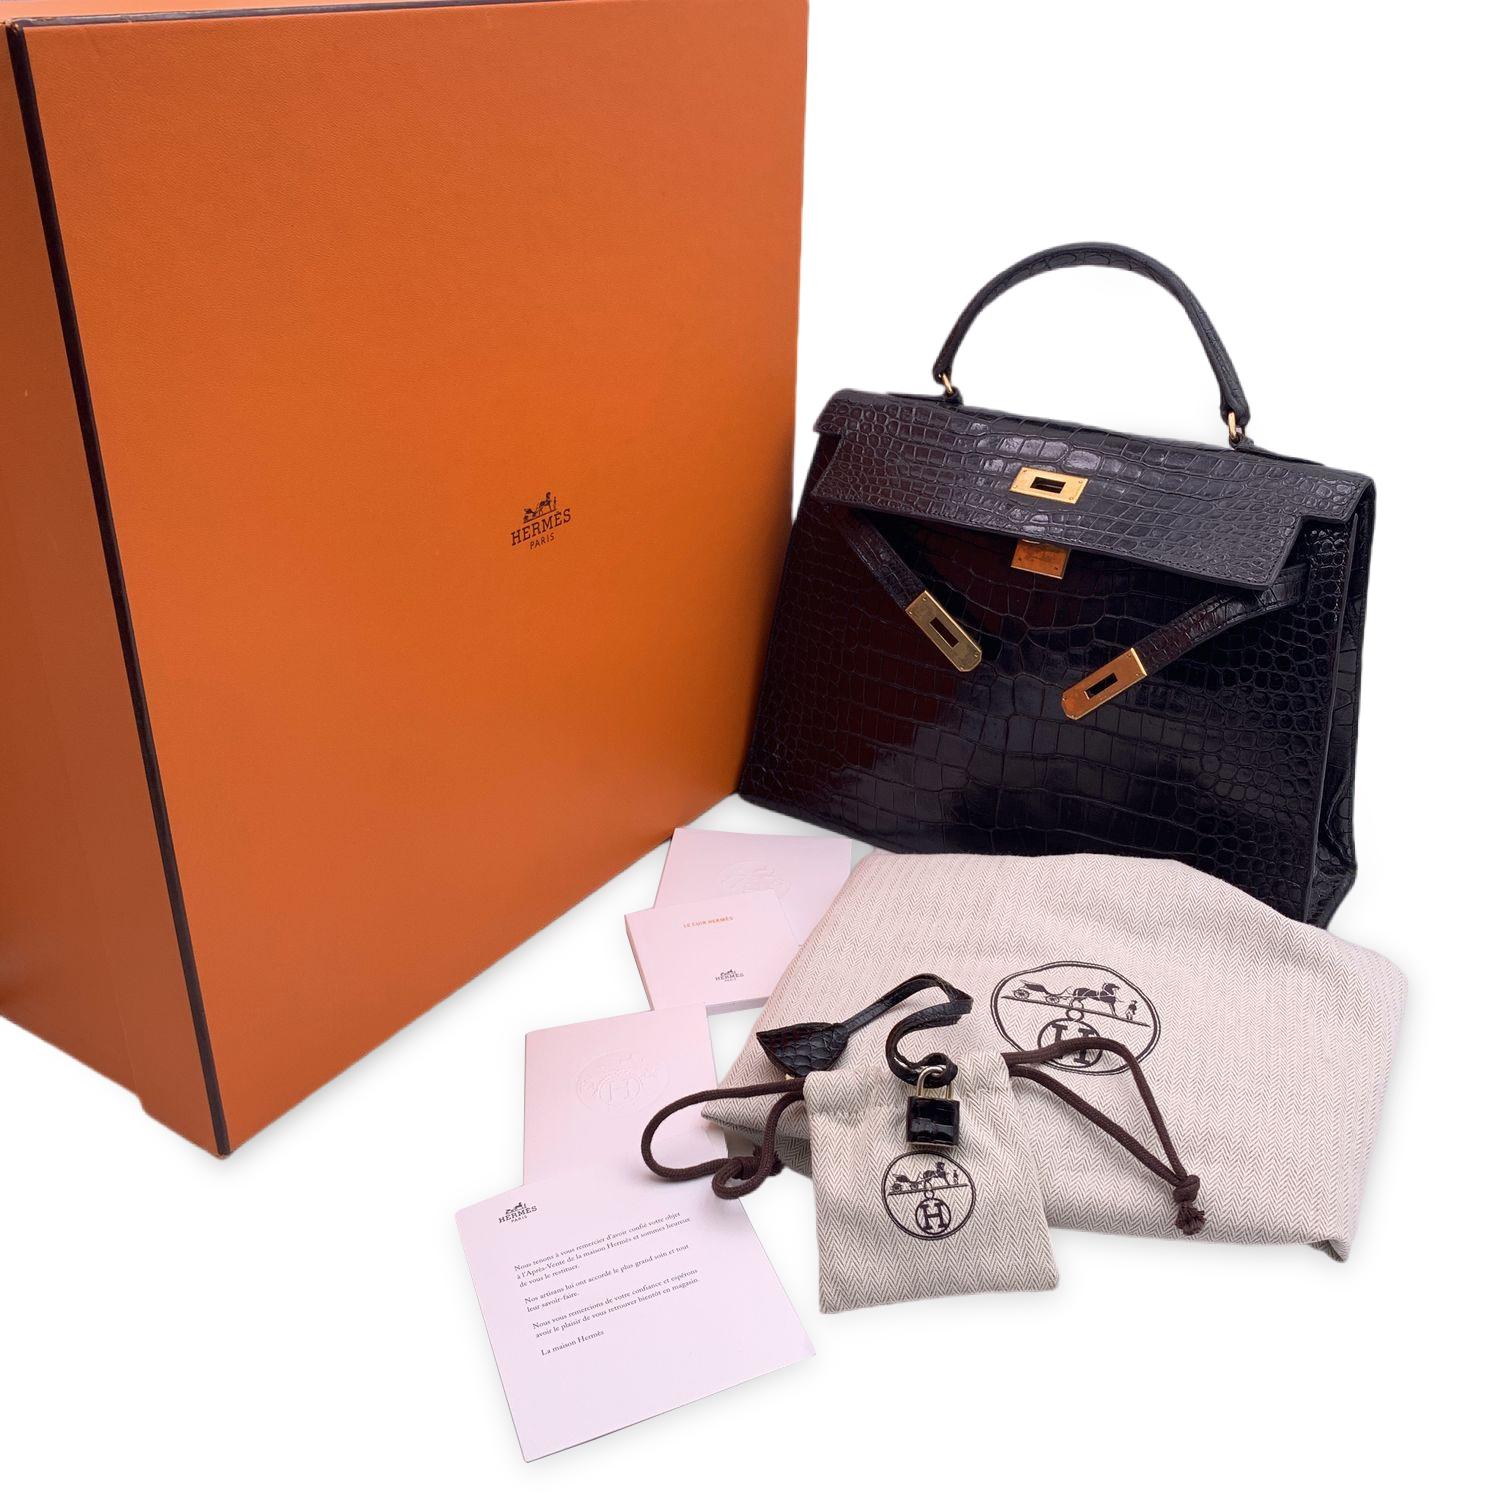 This beautiful Bag will come with a Certificate of Authenticity provided by Entrupy. The certificate will be provided at no further cost.

Timeless vintage Hermes 'Kelly 32 cm' bag crafted in black crocodile leather from the 1940s. The bag is from